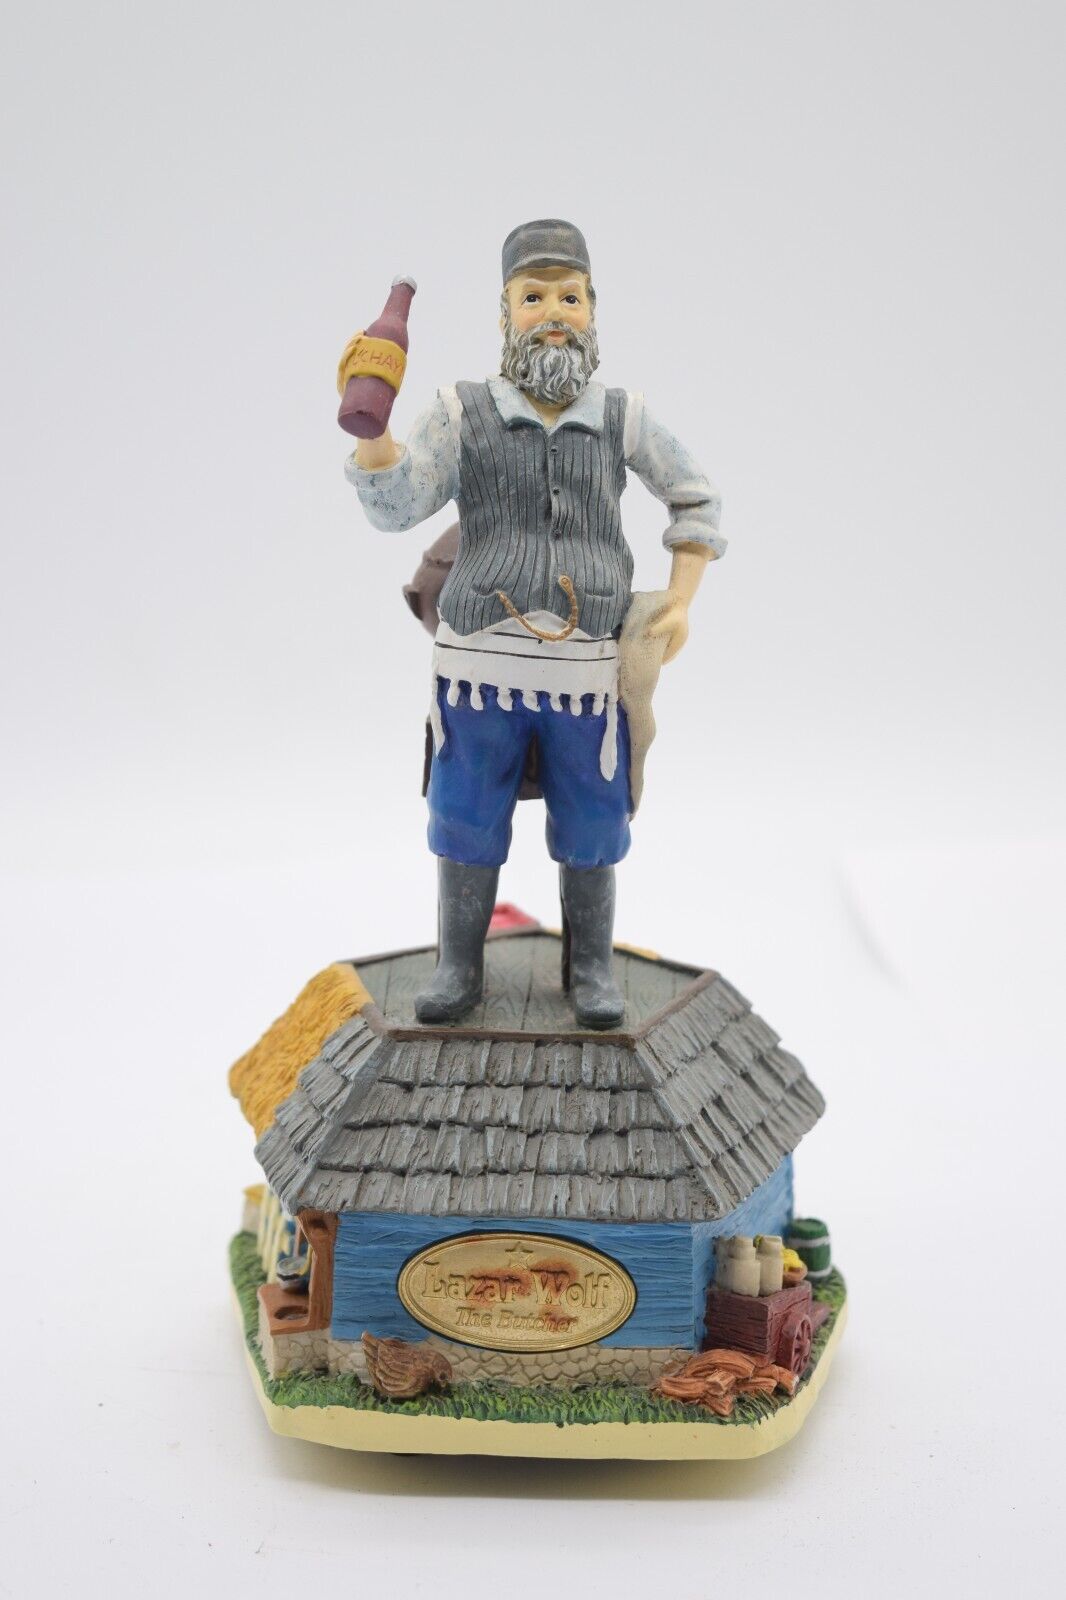 VINTAGE Fiddler On The Roof Musical Figurine LAZAR WOLF JUDAICA COLLECTIBLE